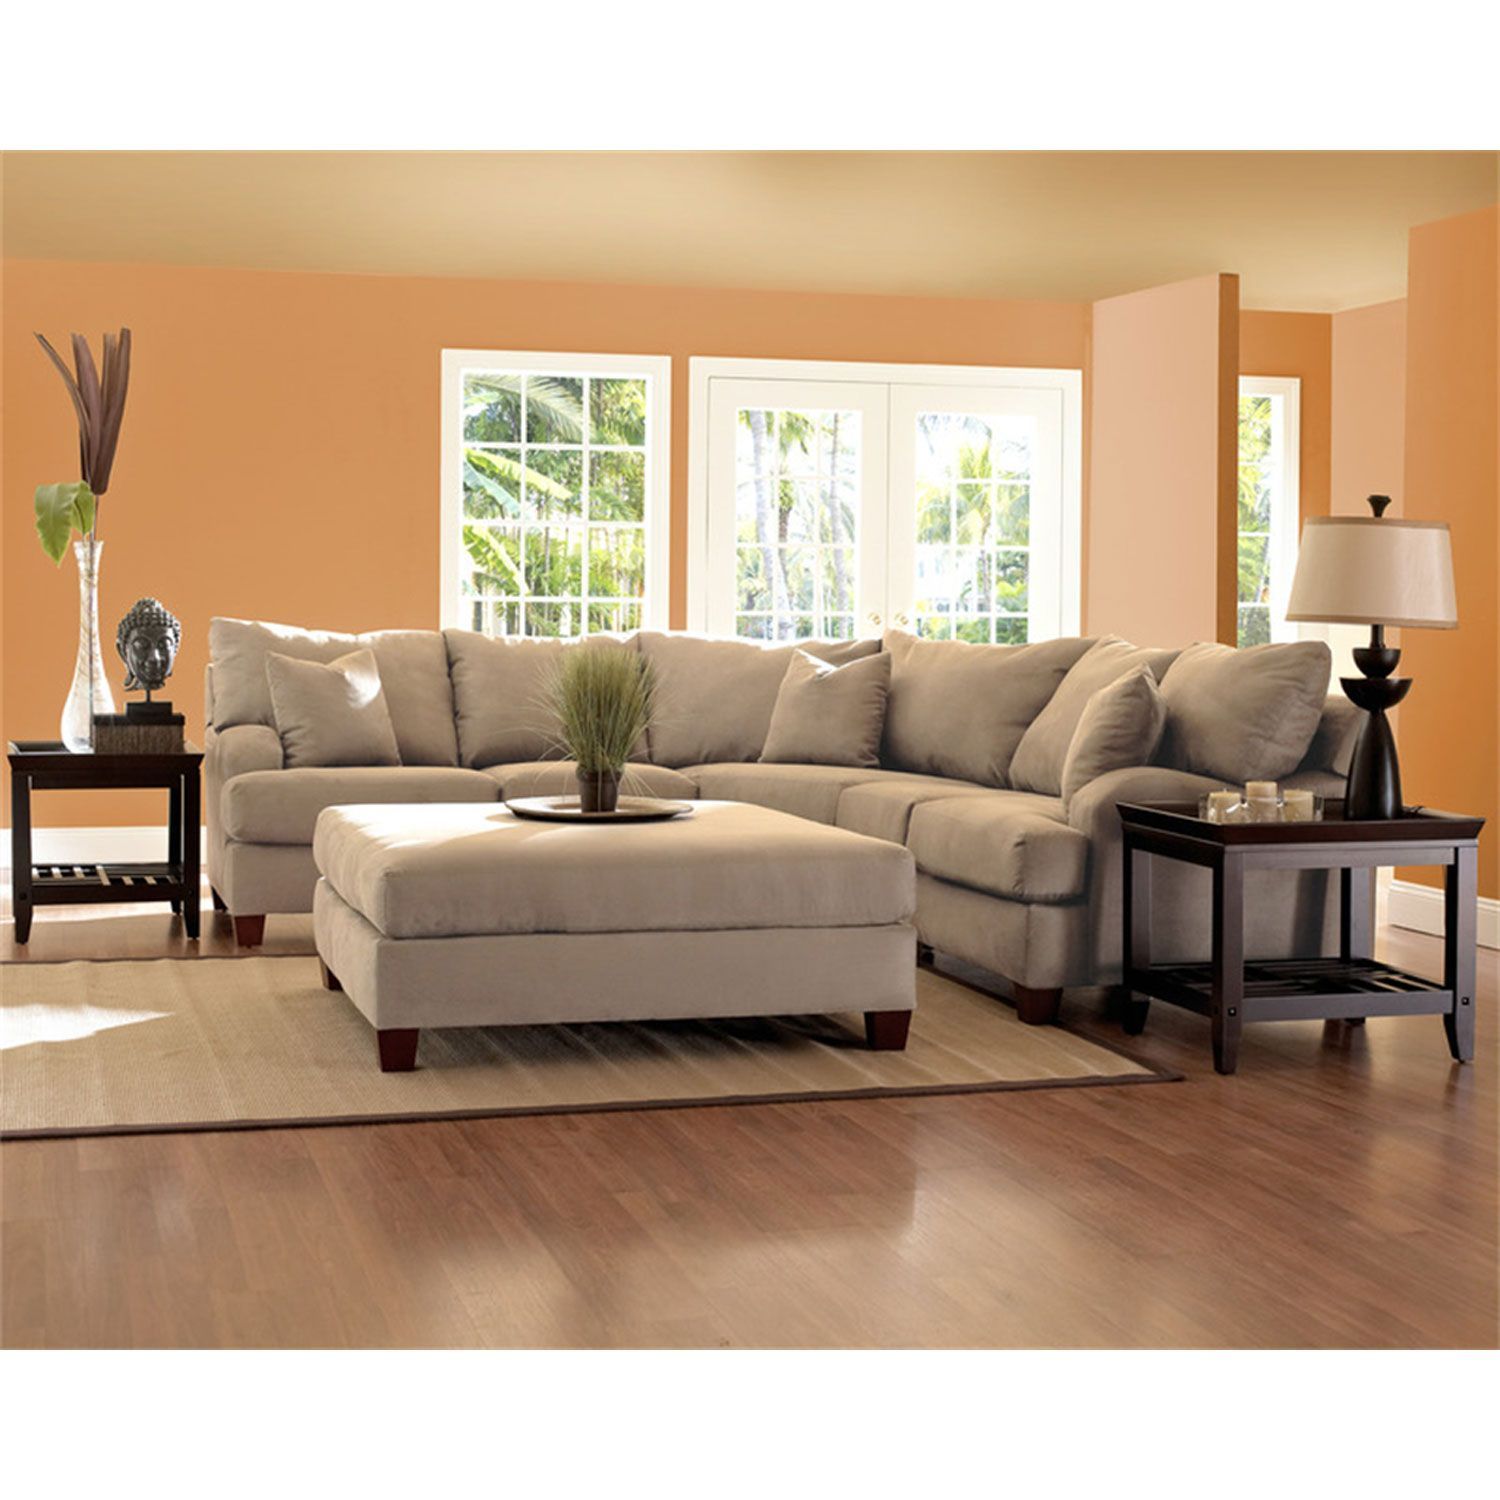 Canyon Beige Sectional Sectional Sofas Sofas & Sectionals Living Room For Small L Shaped Sectional Sofas In Beige (View 14 of 21)